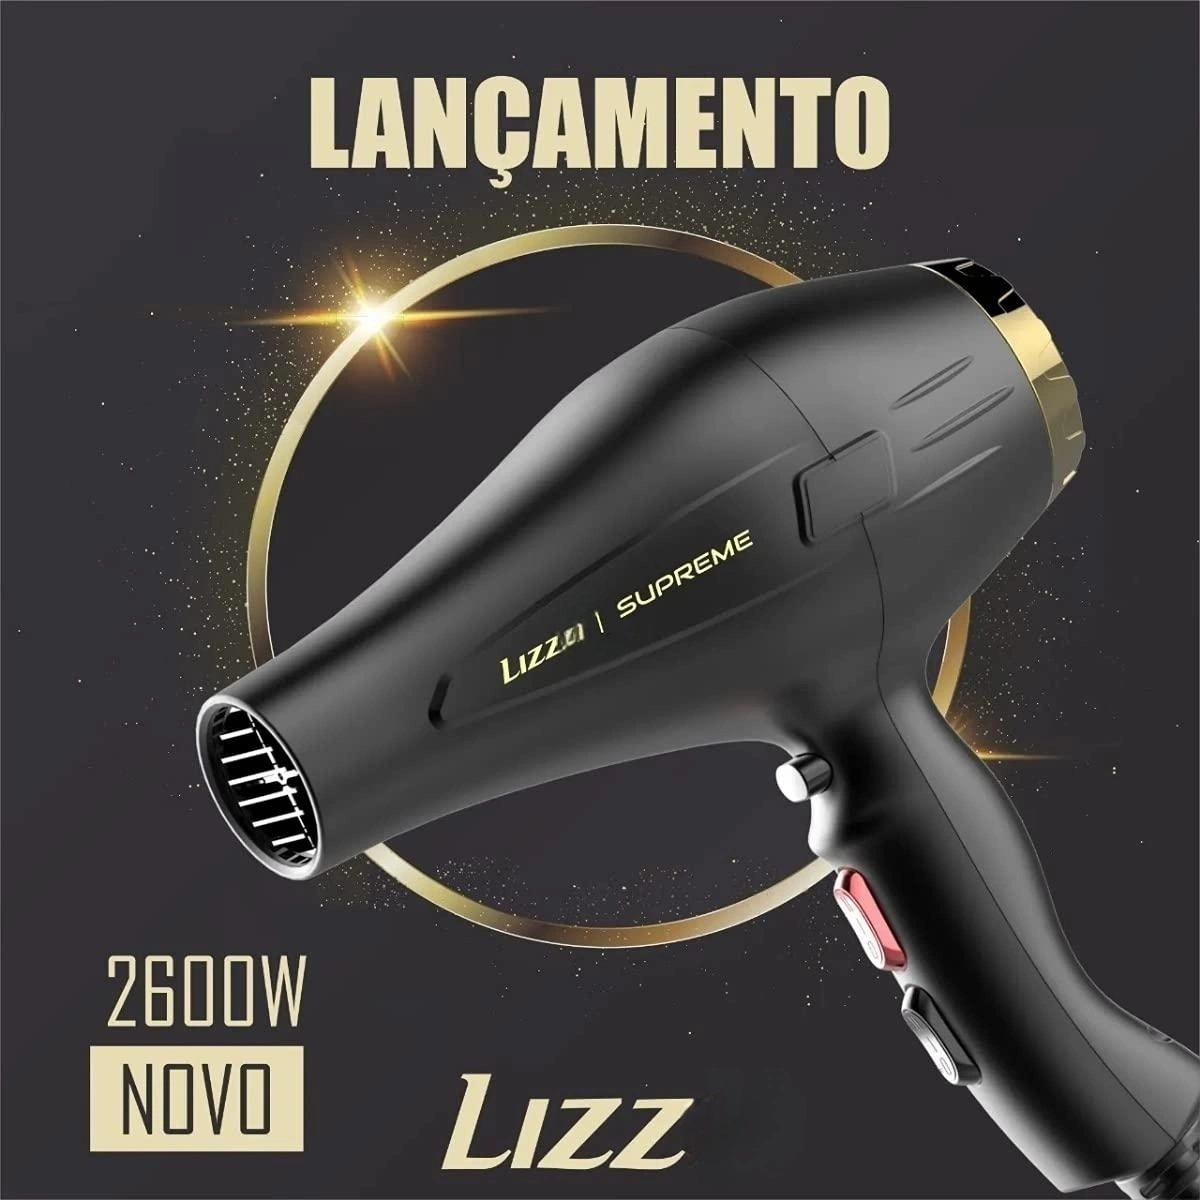 Professional Lizze Hair Dryer Display Light Weight Home Use High quality/High cost performance Blow Dryer Secador